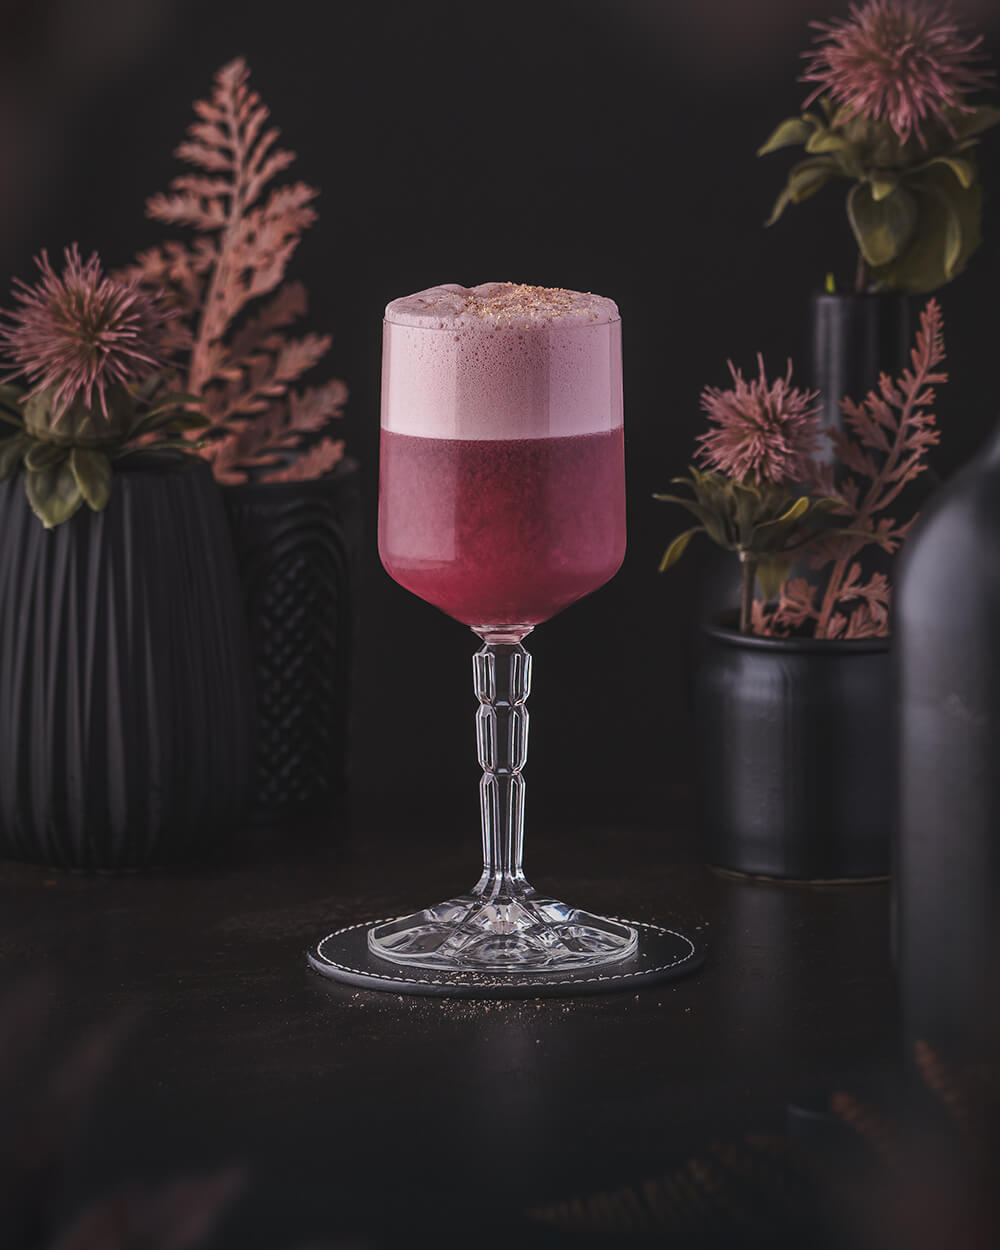 Elk's Own Cocktail - Rye Whiskey based cocktail with red port wine garnished with grated nutmeg. Deep red magenta color.